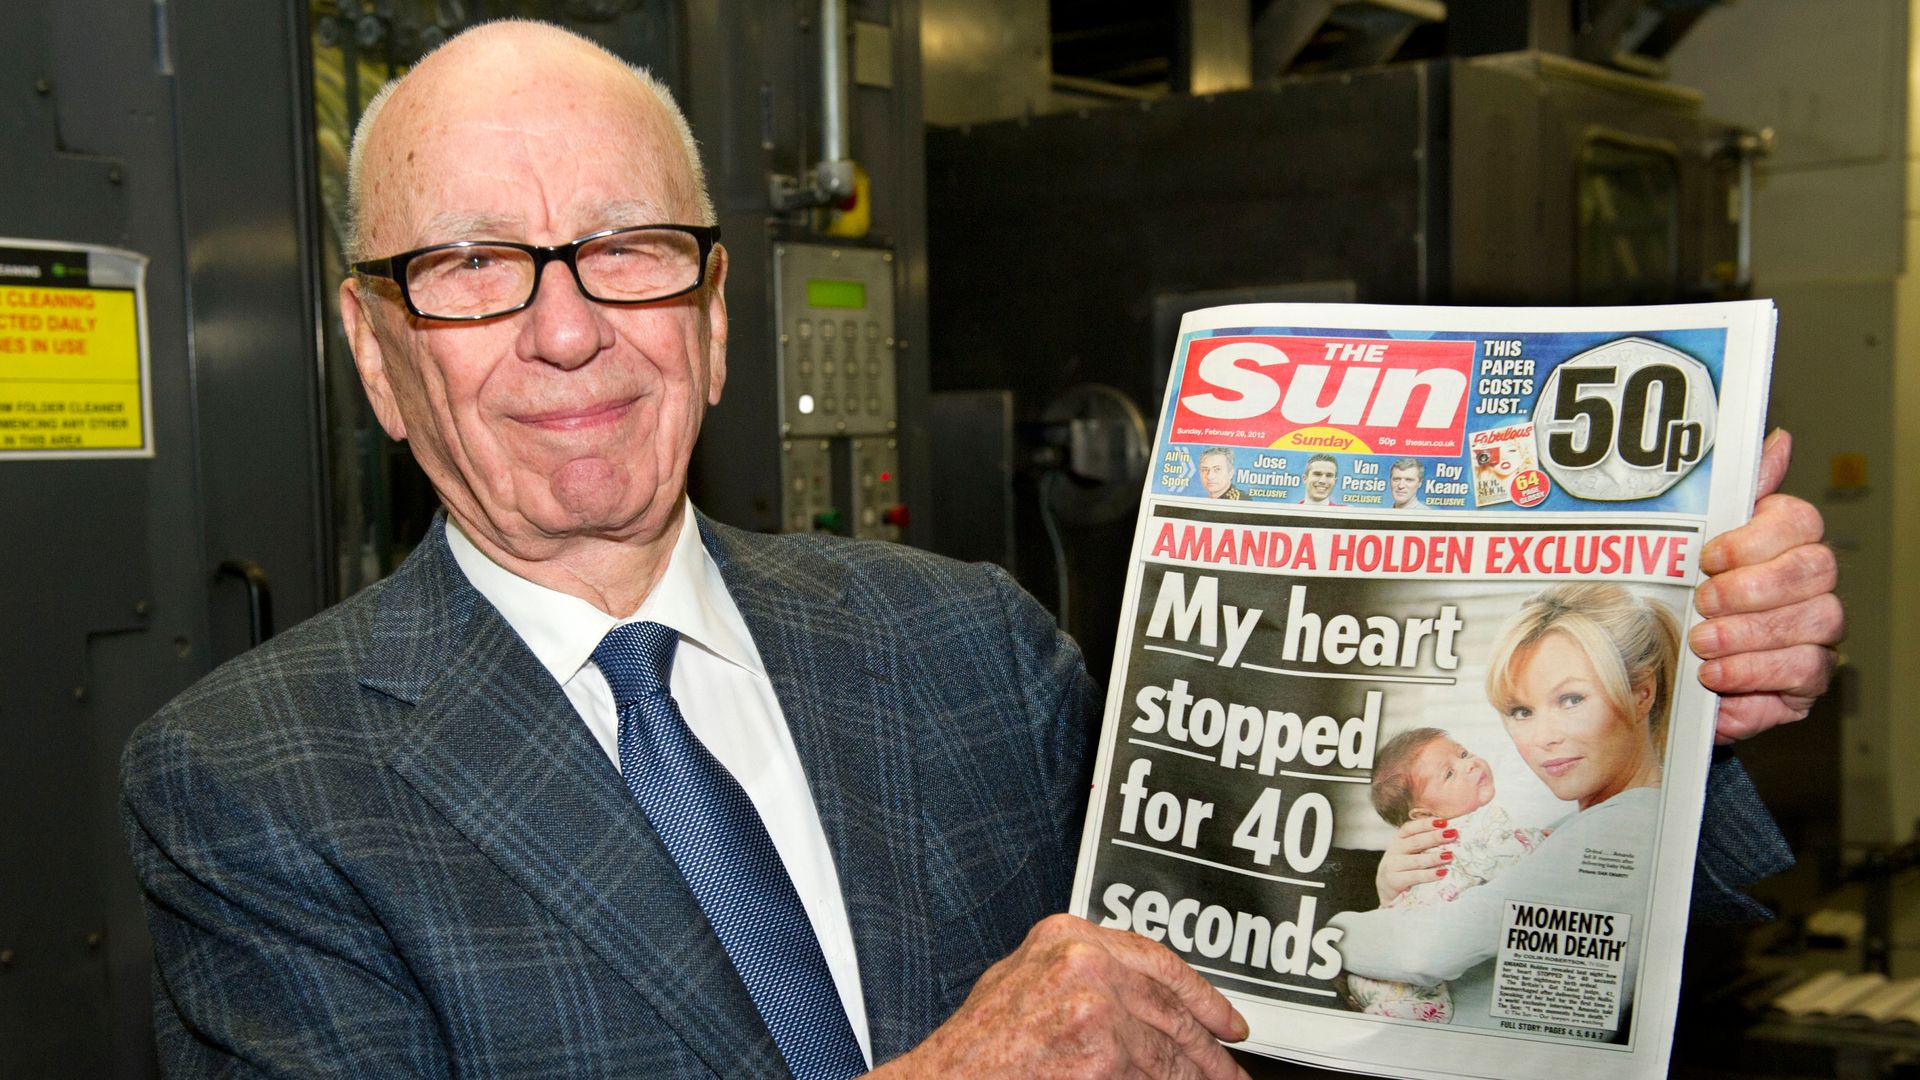 A photo of Rupert Murdoch smiling and holding a newspaper